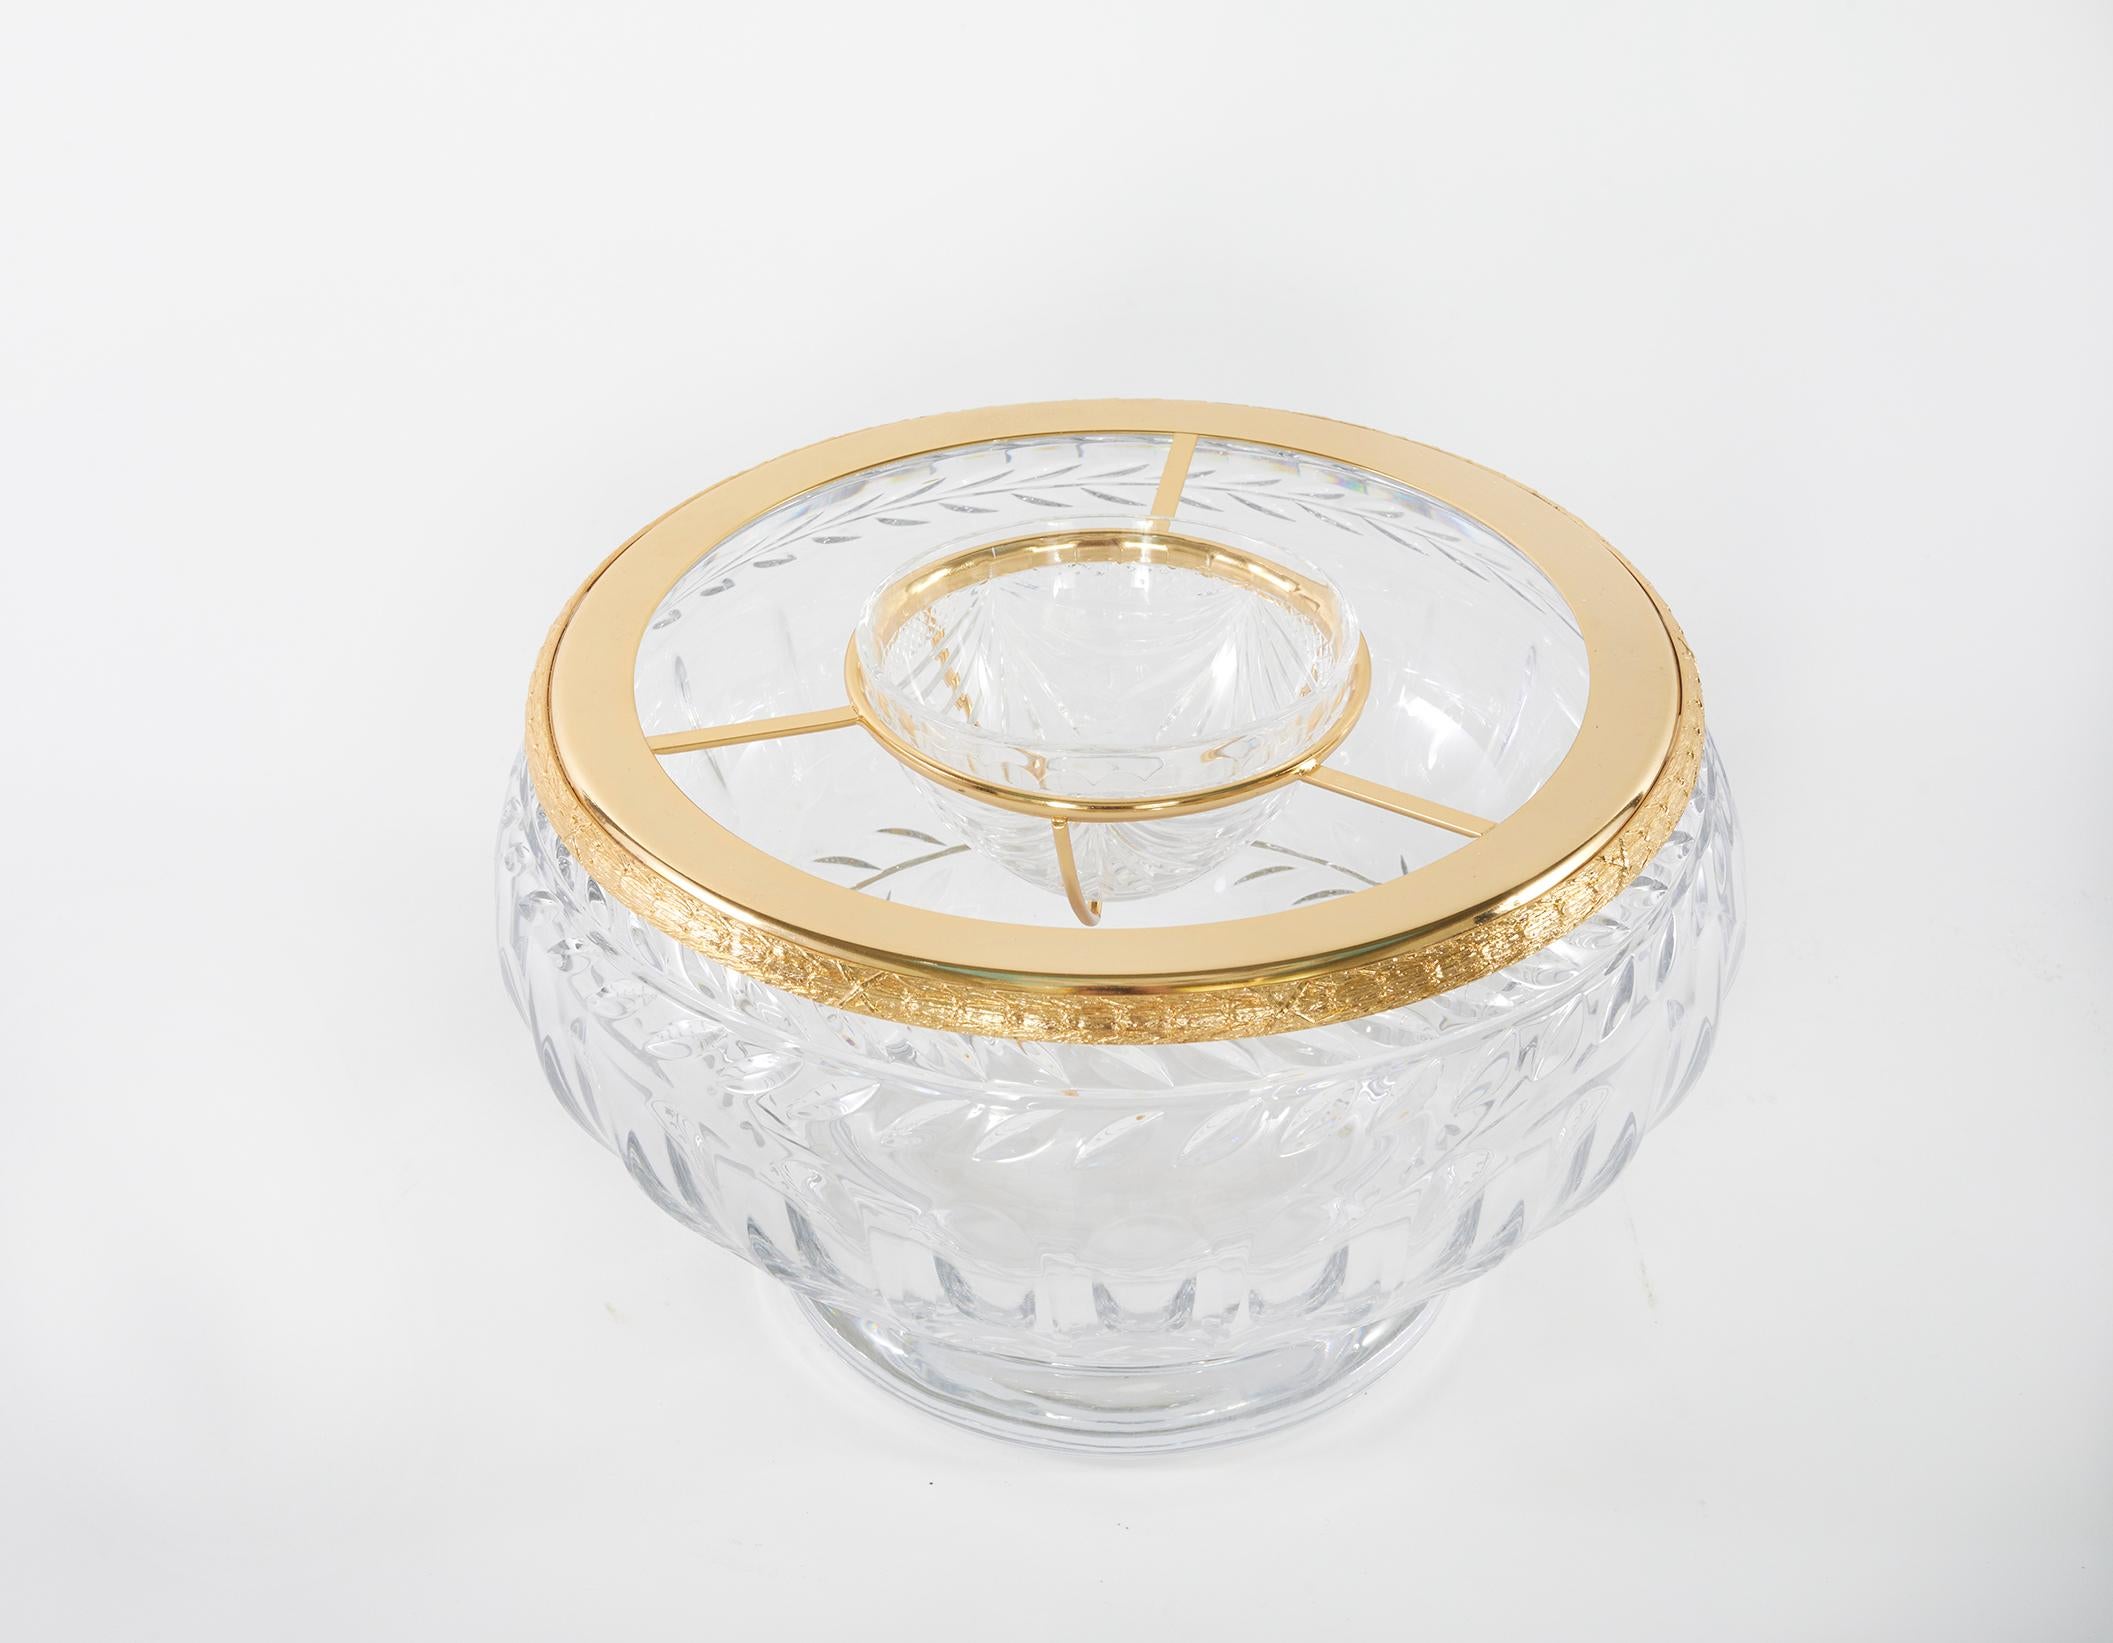 French cut crystal gilt bronze mounted caviar service, the caviar service is in great condition. Minor shelve wear underneath consistent with age / use. The inner bowl is about 4.5 inches diameter X 2.5 inches tall. The outer bowl is 10.2 inches